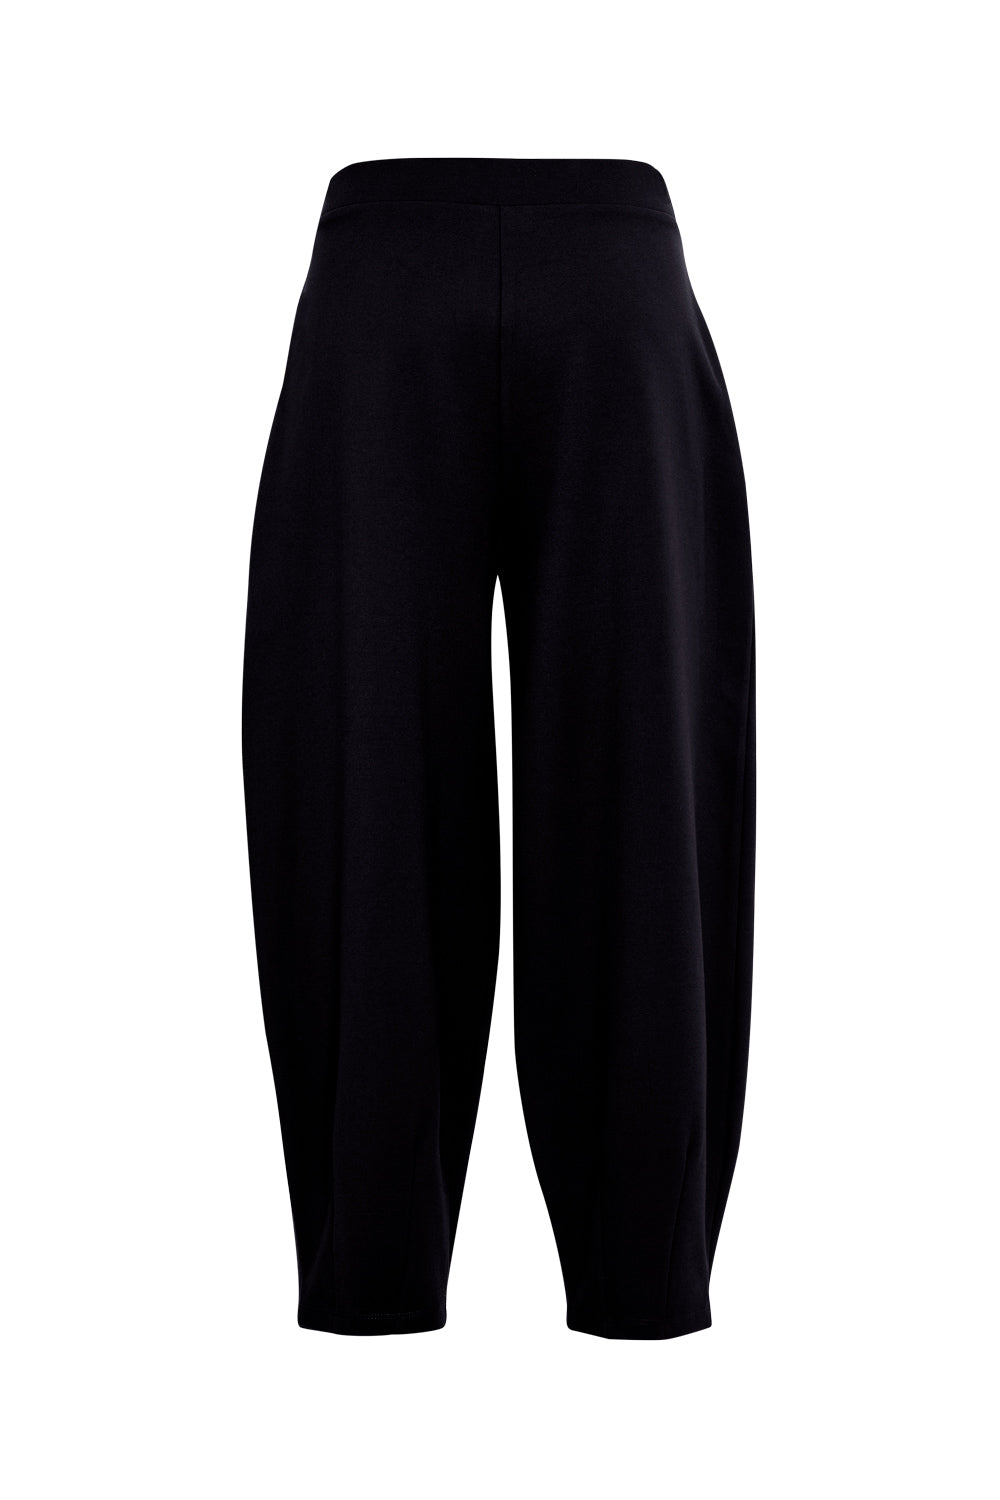 MADLY SWEETLY ON PONTE TULIP PANT - BLACK - THE VOGUE STORE